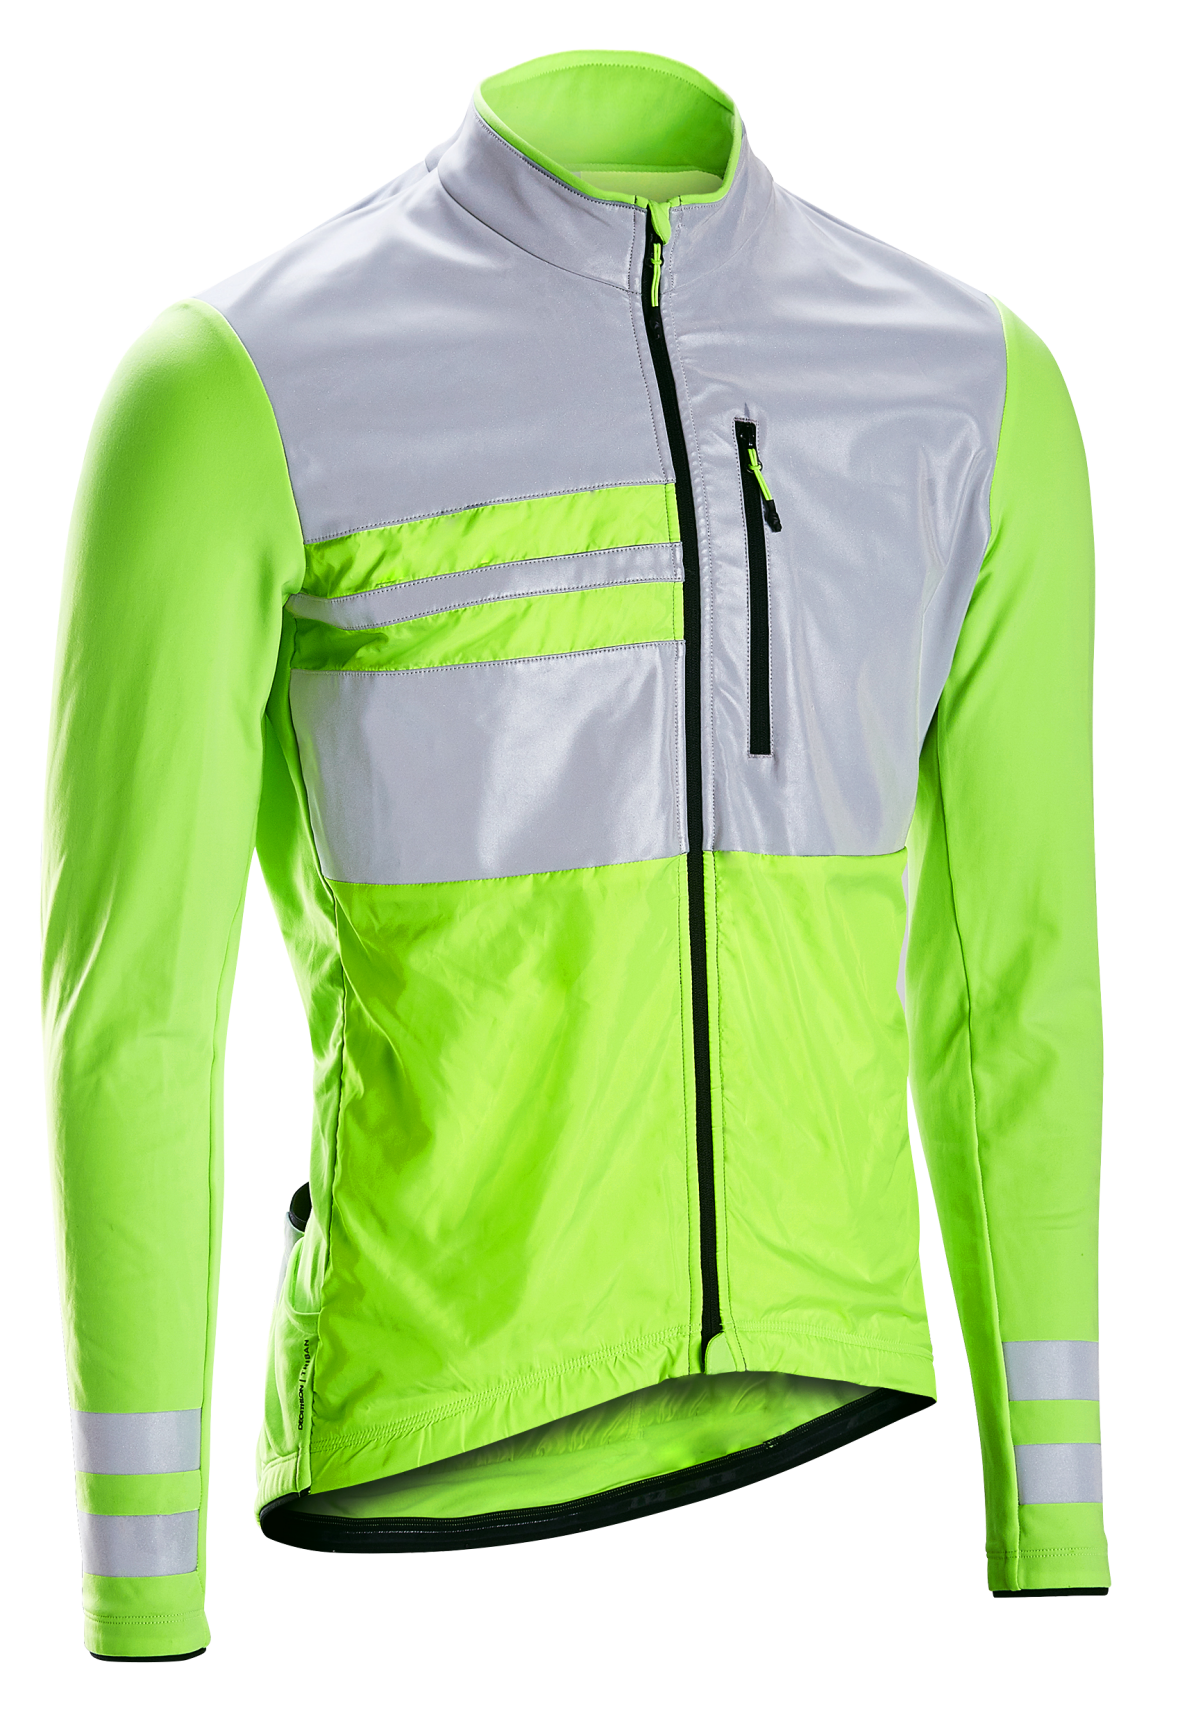 TRIBAN JERSEY RC500 VISIBLE